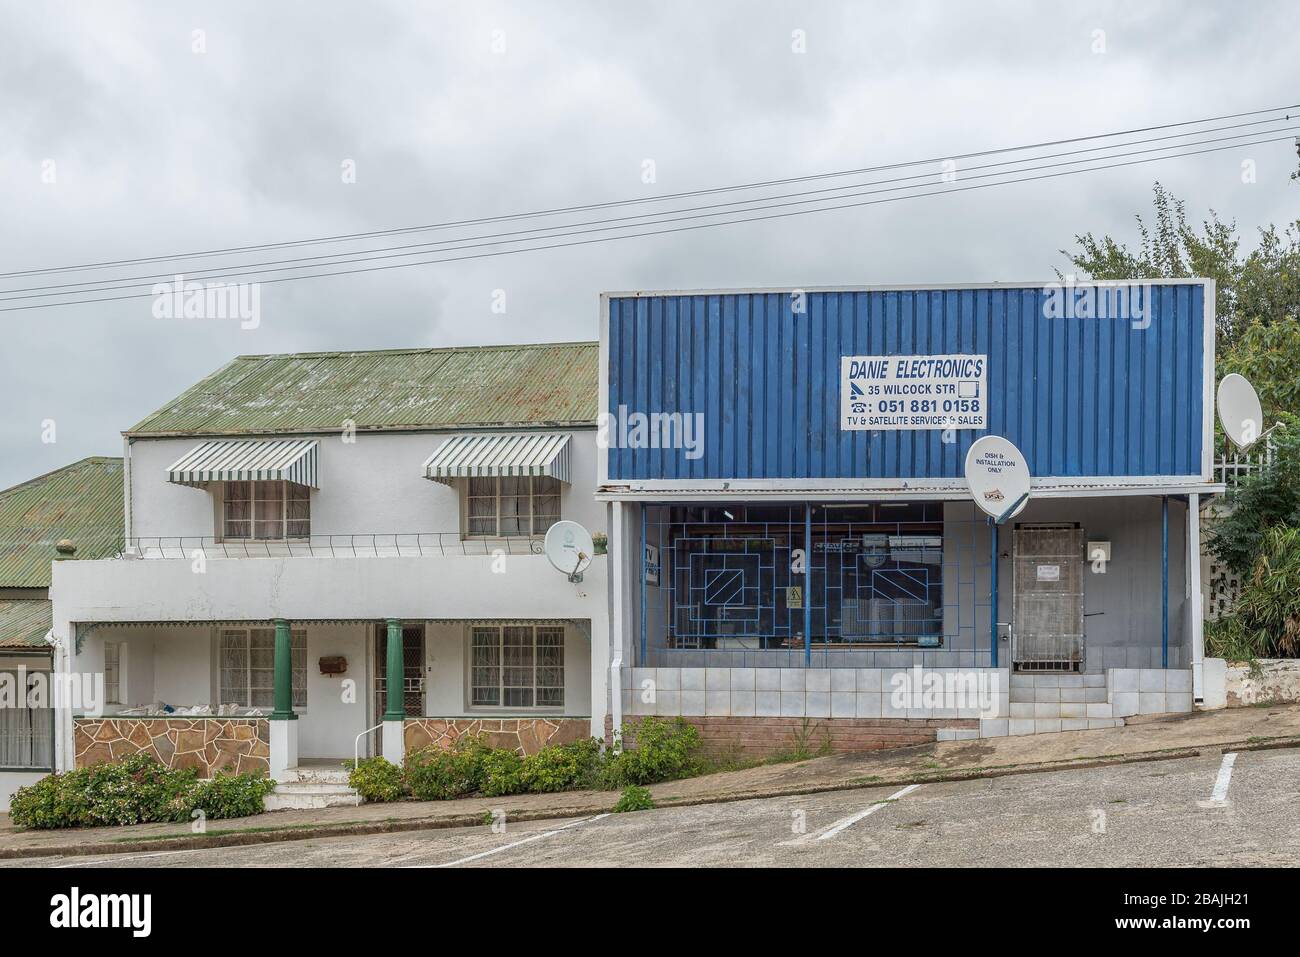 WINBURG, SOUTH AFRICA - MARCH 1, 2020: A street scene, with an electronics store and house, in Winburg, a small town in the Free State Province Stock Photo